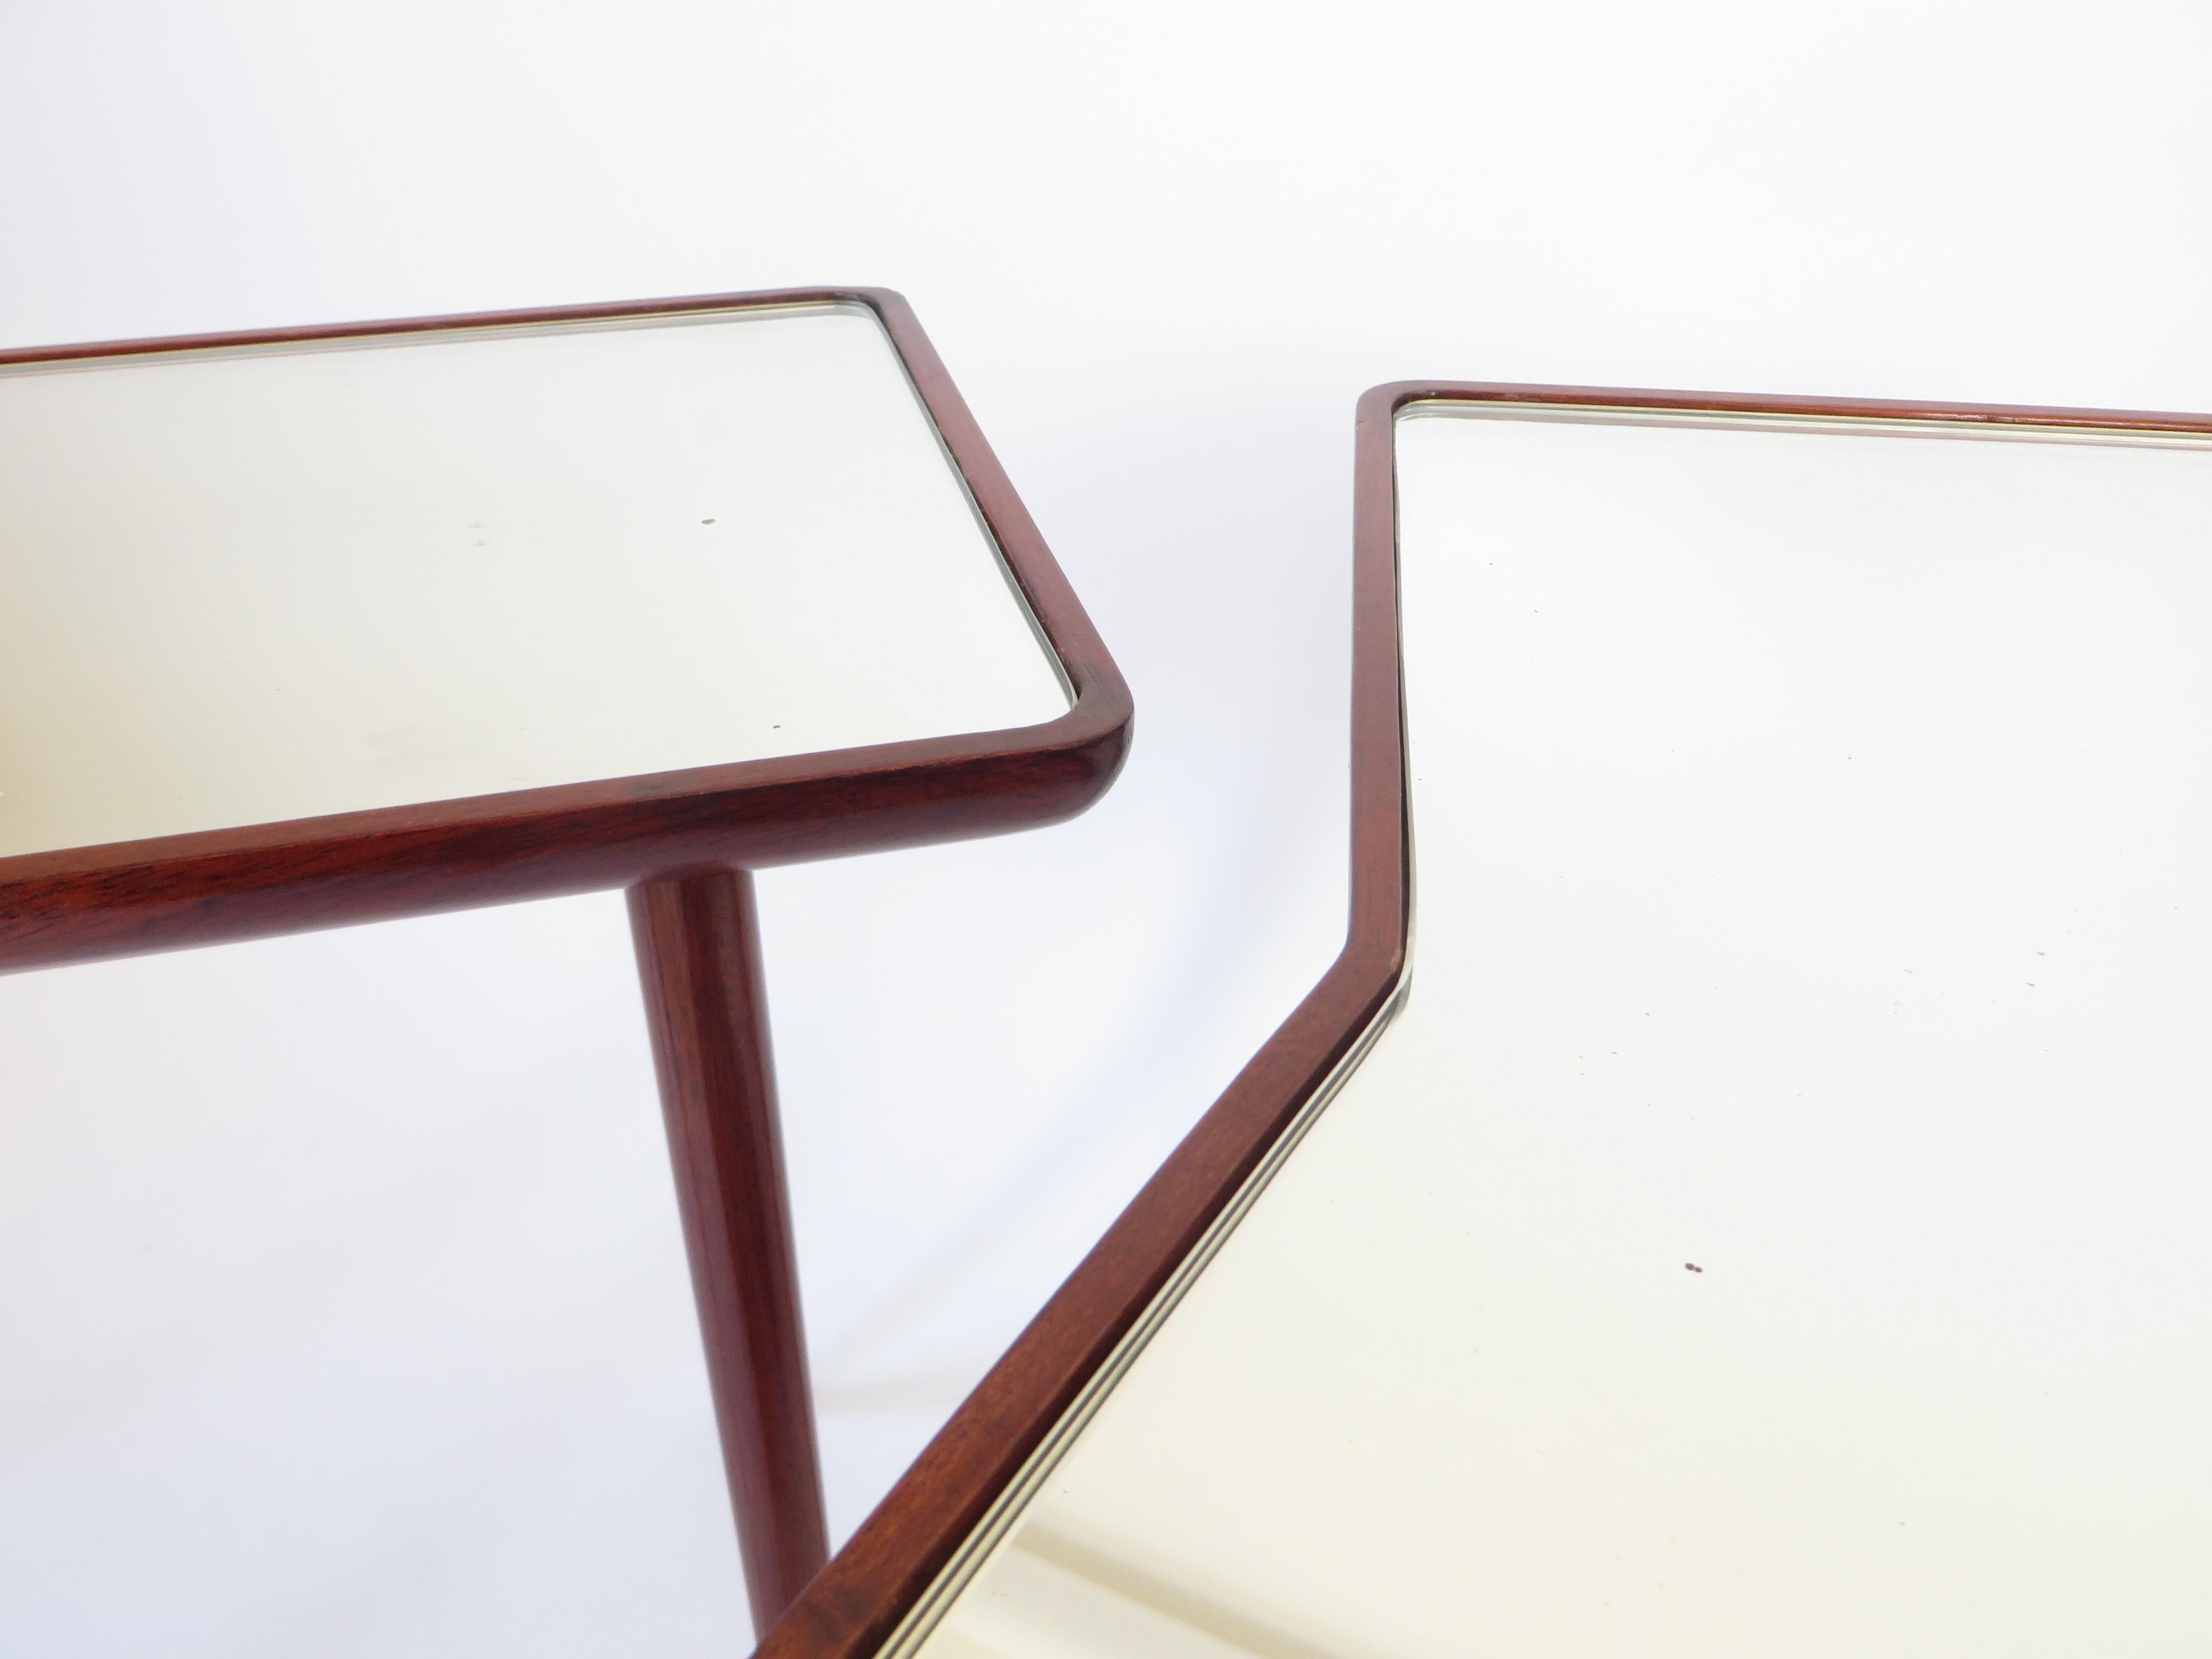 Mid-20th Century Gio Ponti Pair of Walnut Side Tables Mirrored Glass Tops Asymmetrical Forms